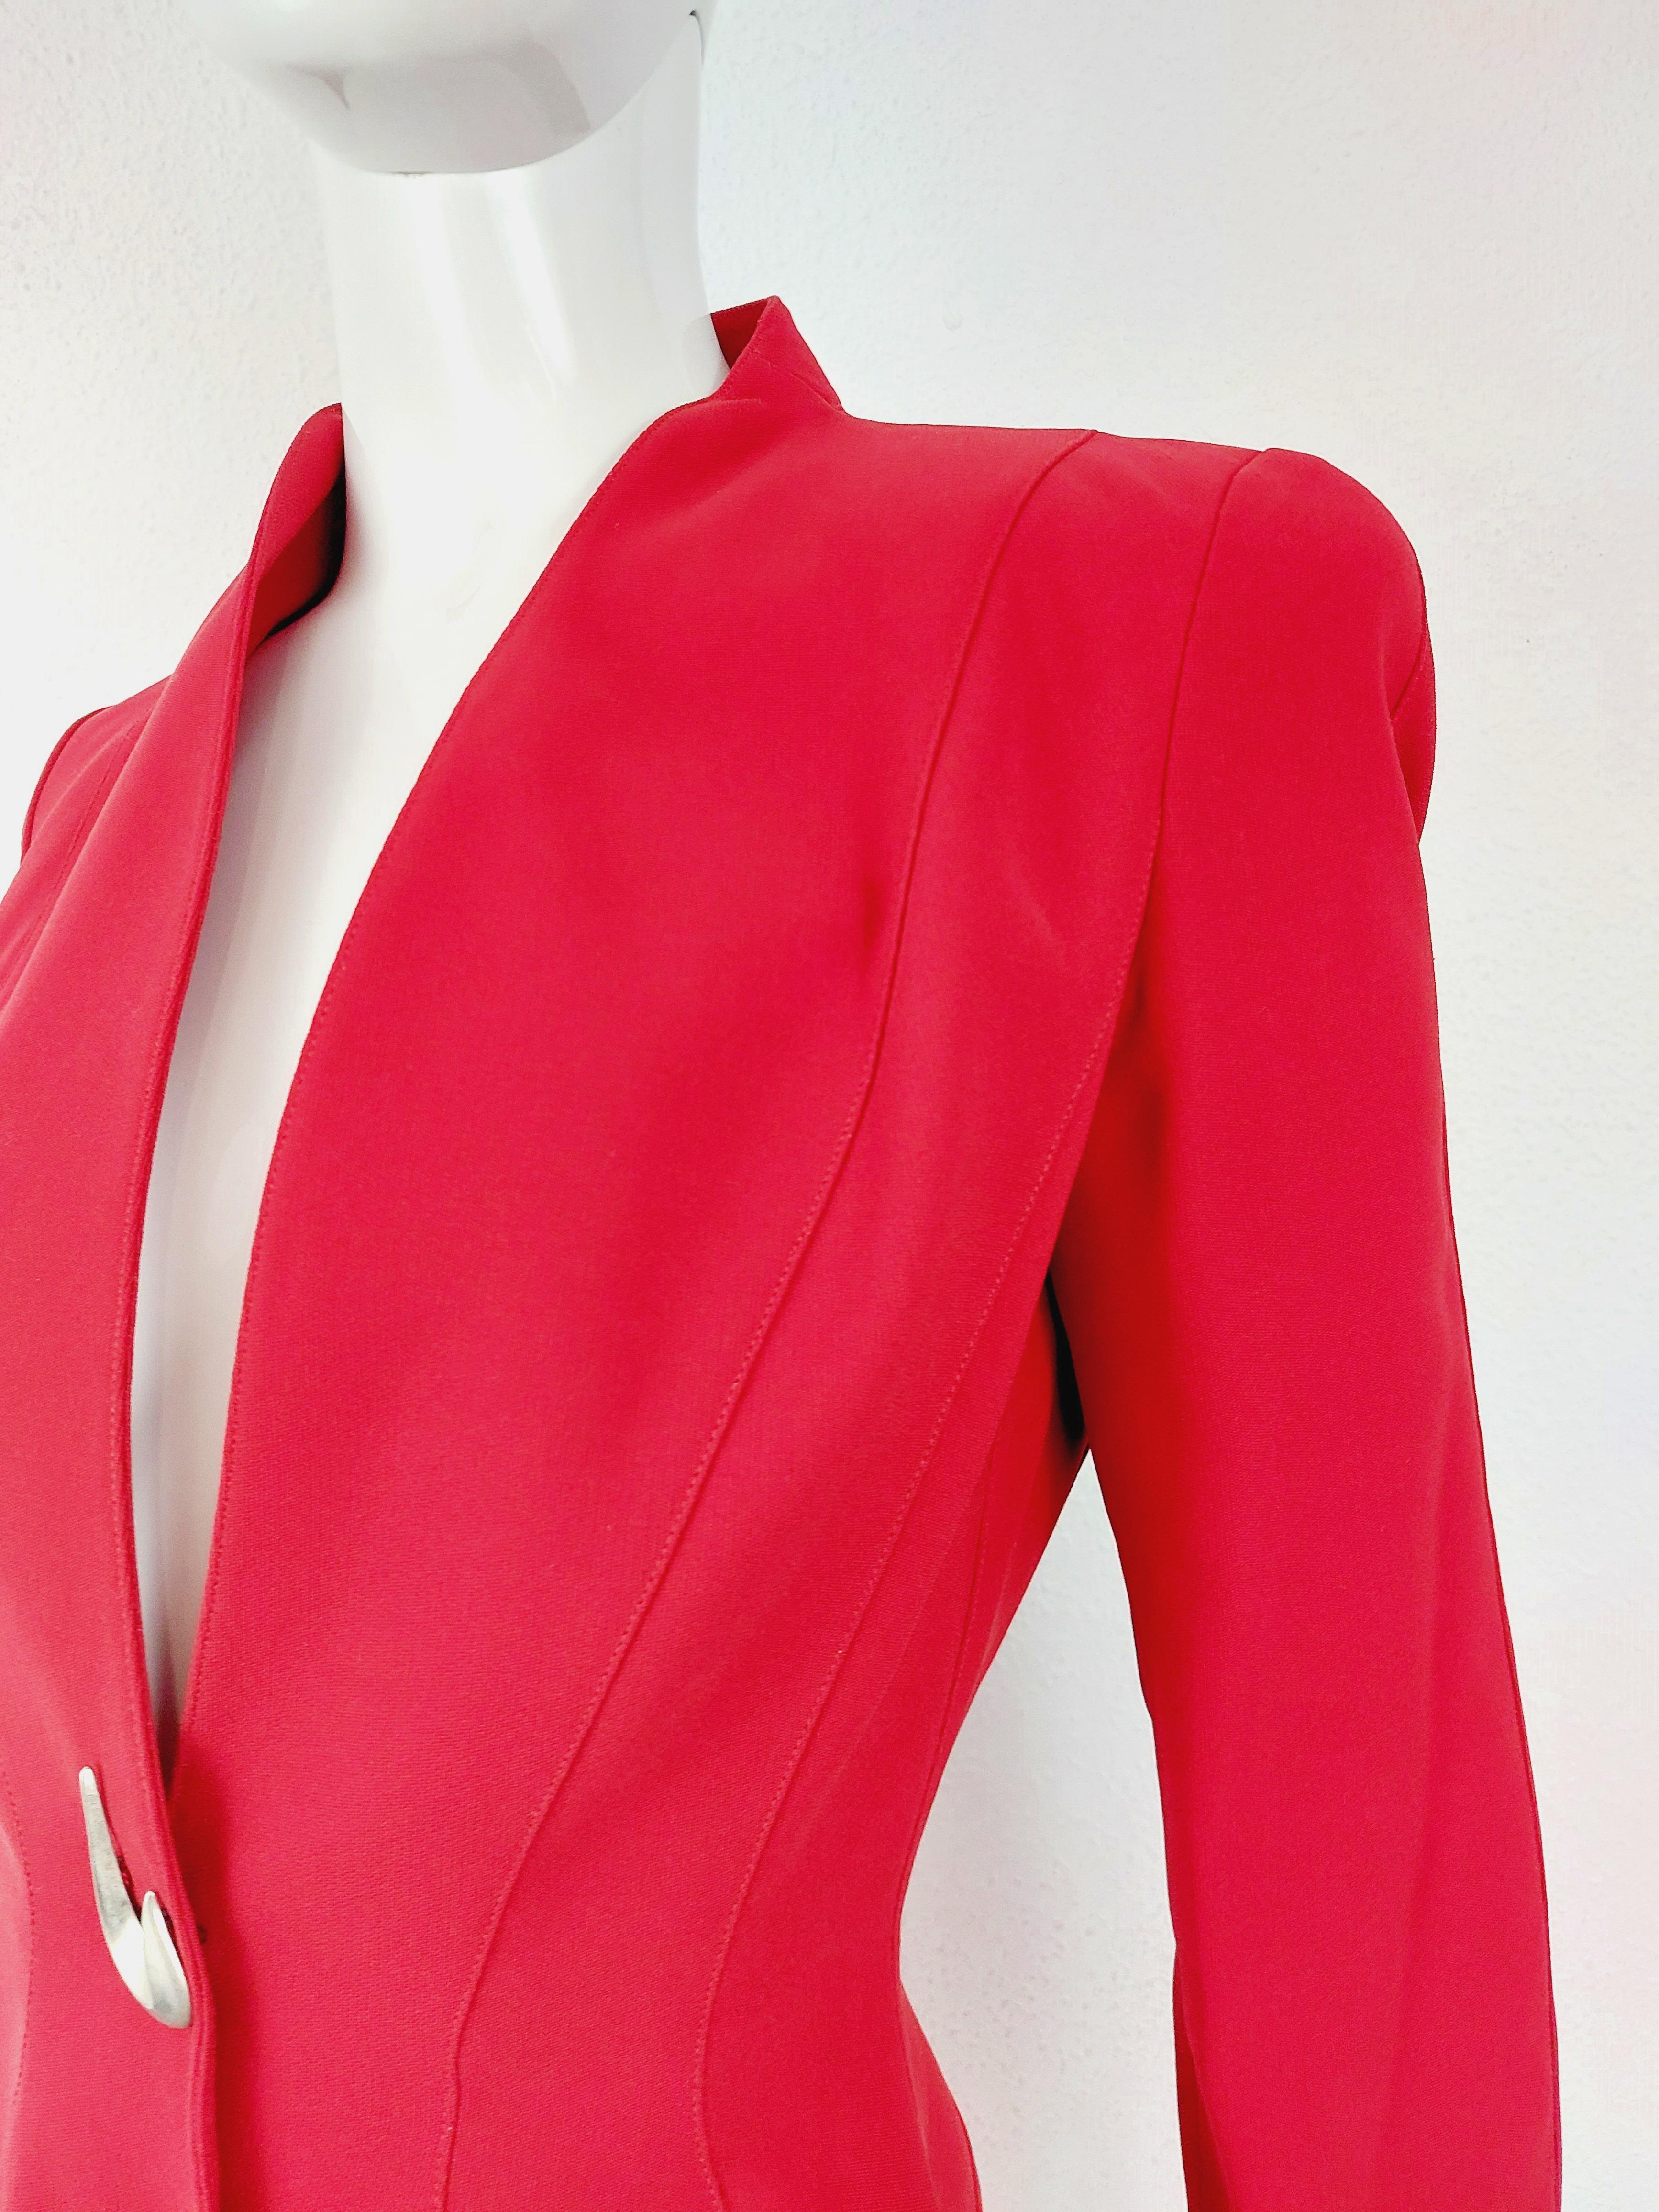 Women's Thierry Mugler Couture 2000 AW Sculptural Red Wasp Pin Brooch Jacket Blazer